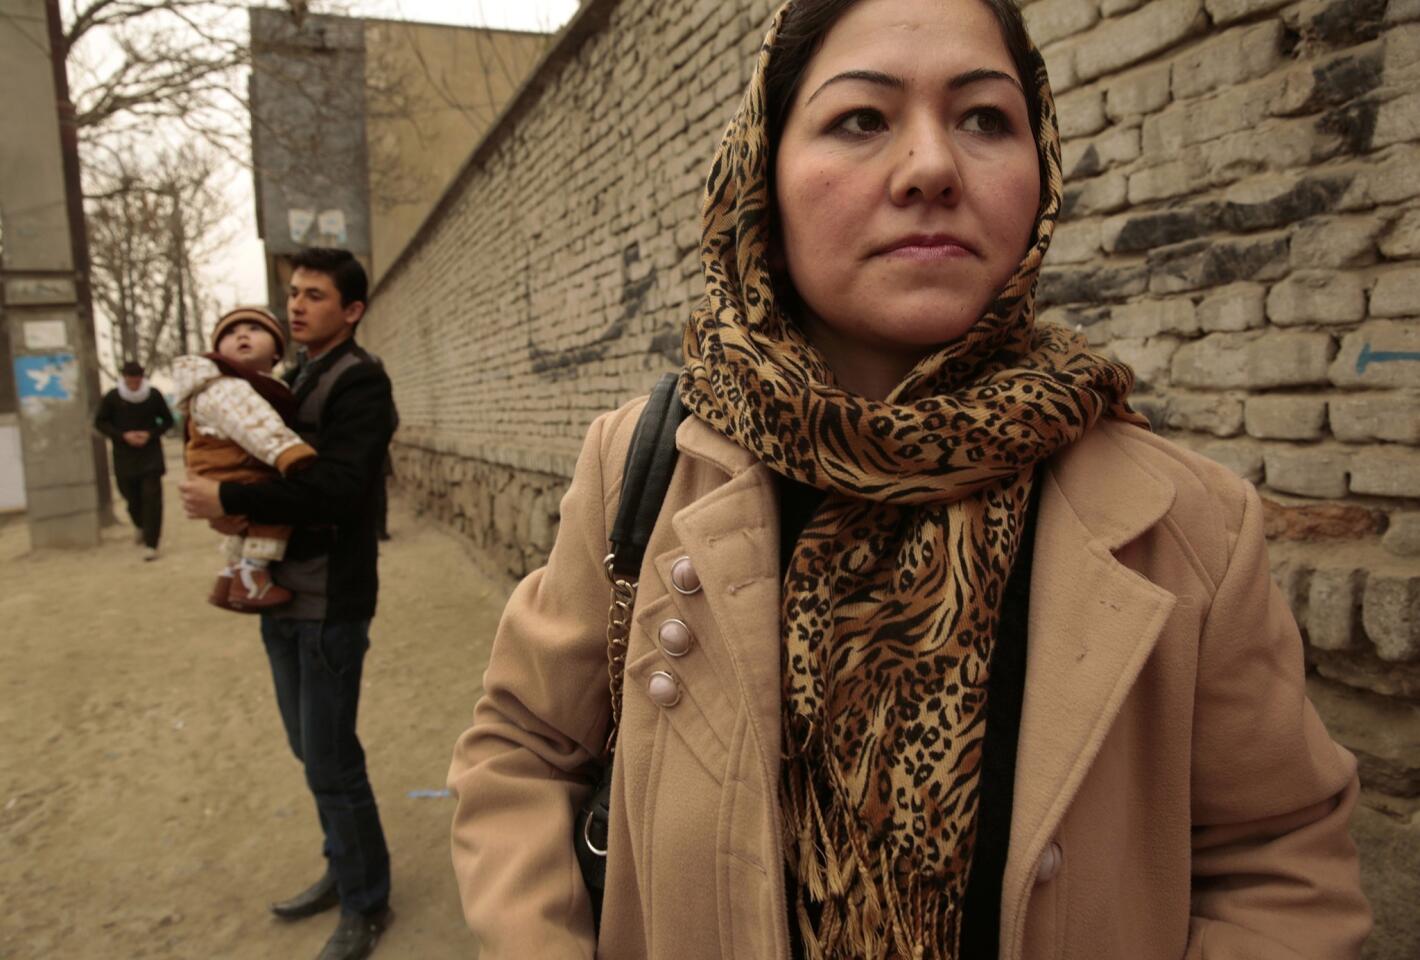 Ghazalan Koofi, 26, waits for a ride to work as her brother-in-law Shafiq Azizi holds her baby, Ahmad, 11 months. Despite growing up under Taliban rule, Koofi was able to graduate from high school, and is now studying literature in college. But with U.S. combat troops leaving Afghanistan next year, Koofi and other Afghan women worry that their freedoms will begin to erode. "We are entering a very dangerous period for women," Koofi says.